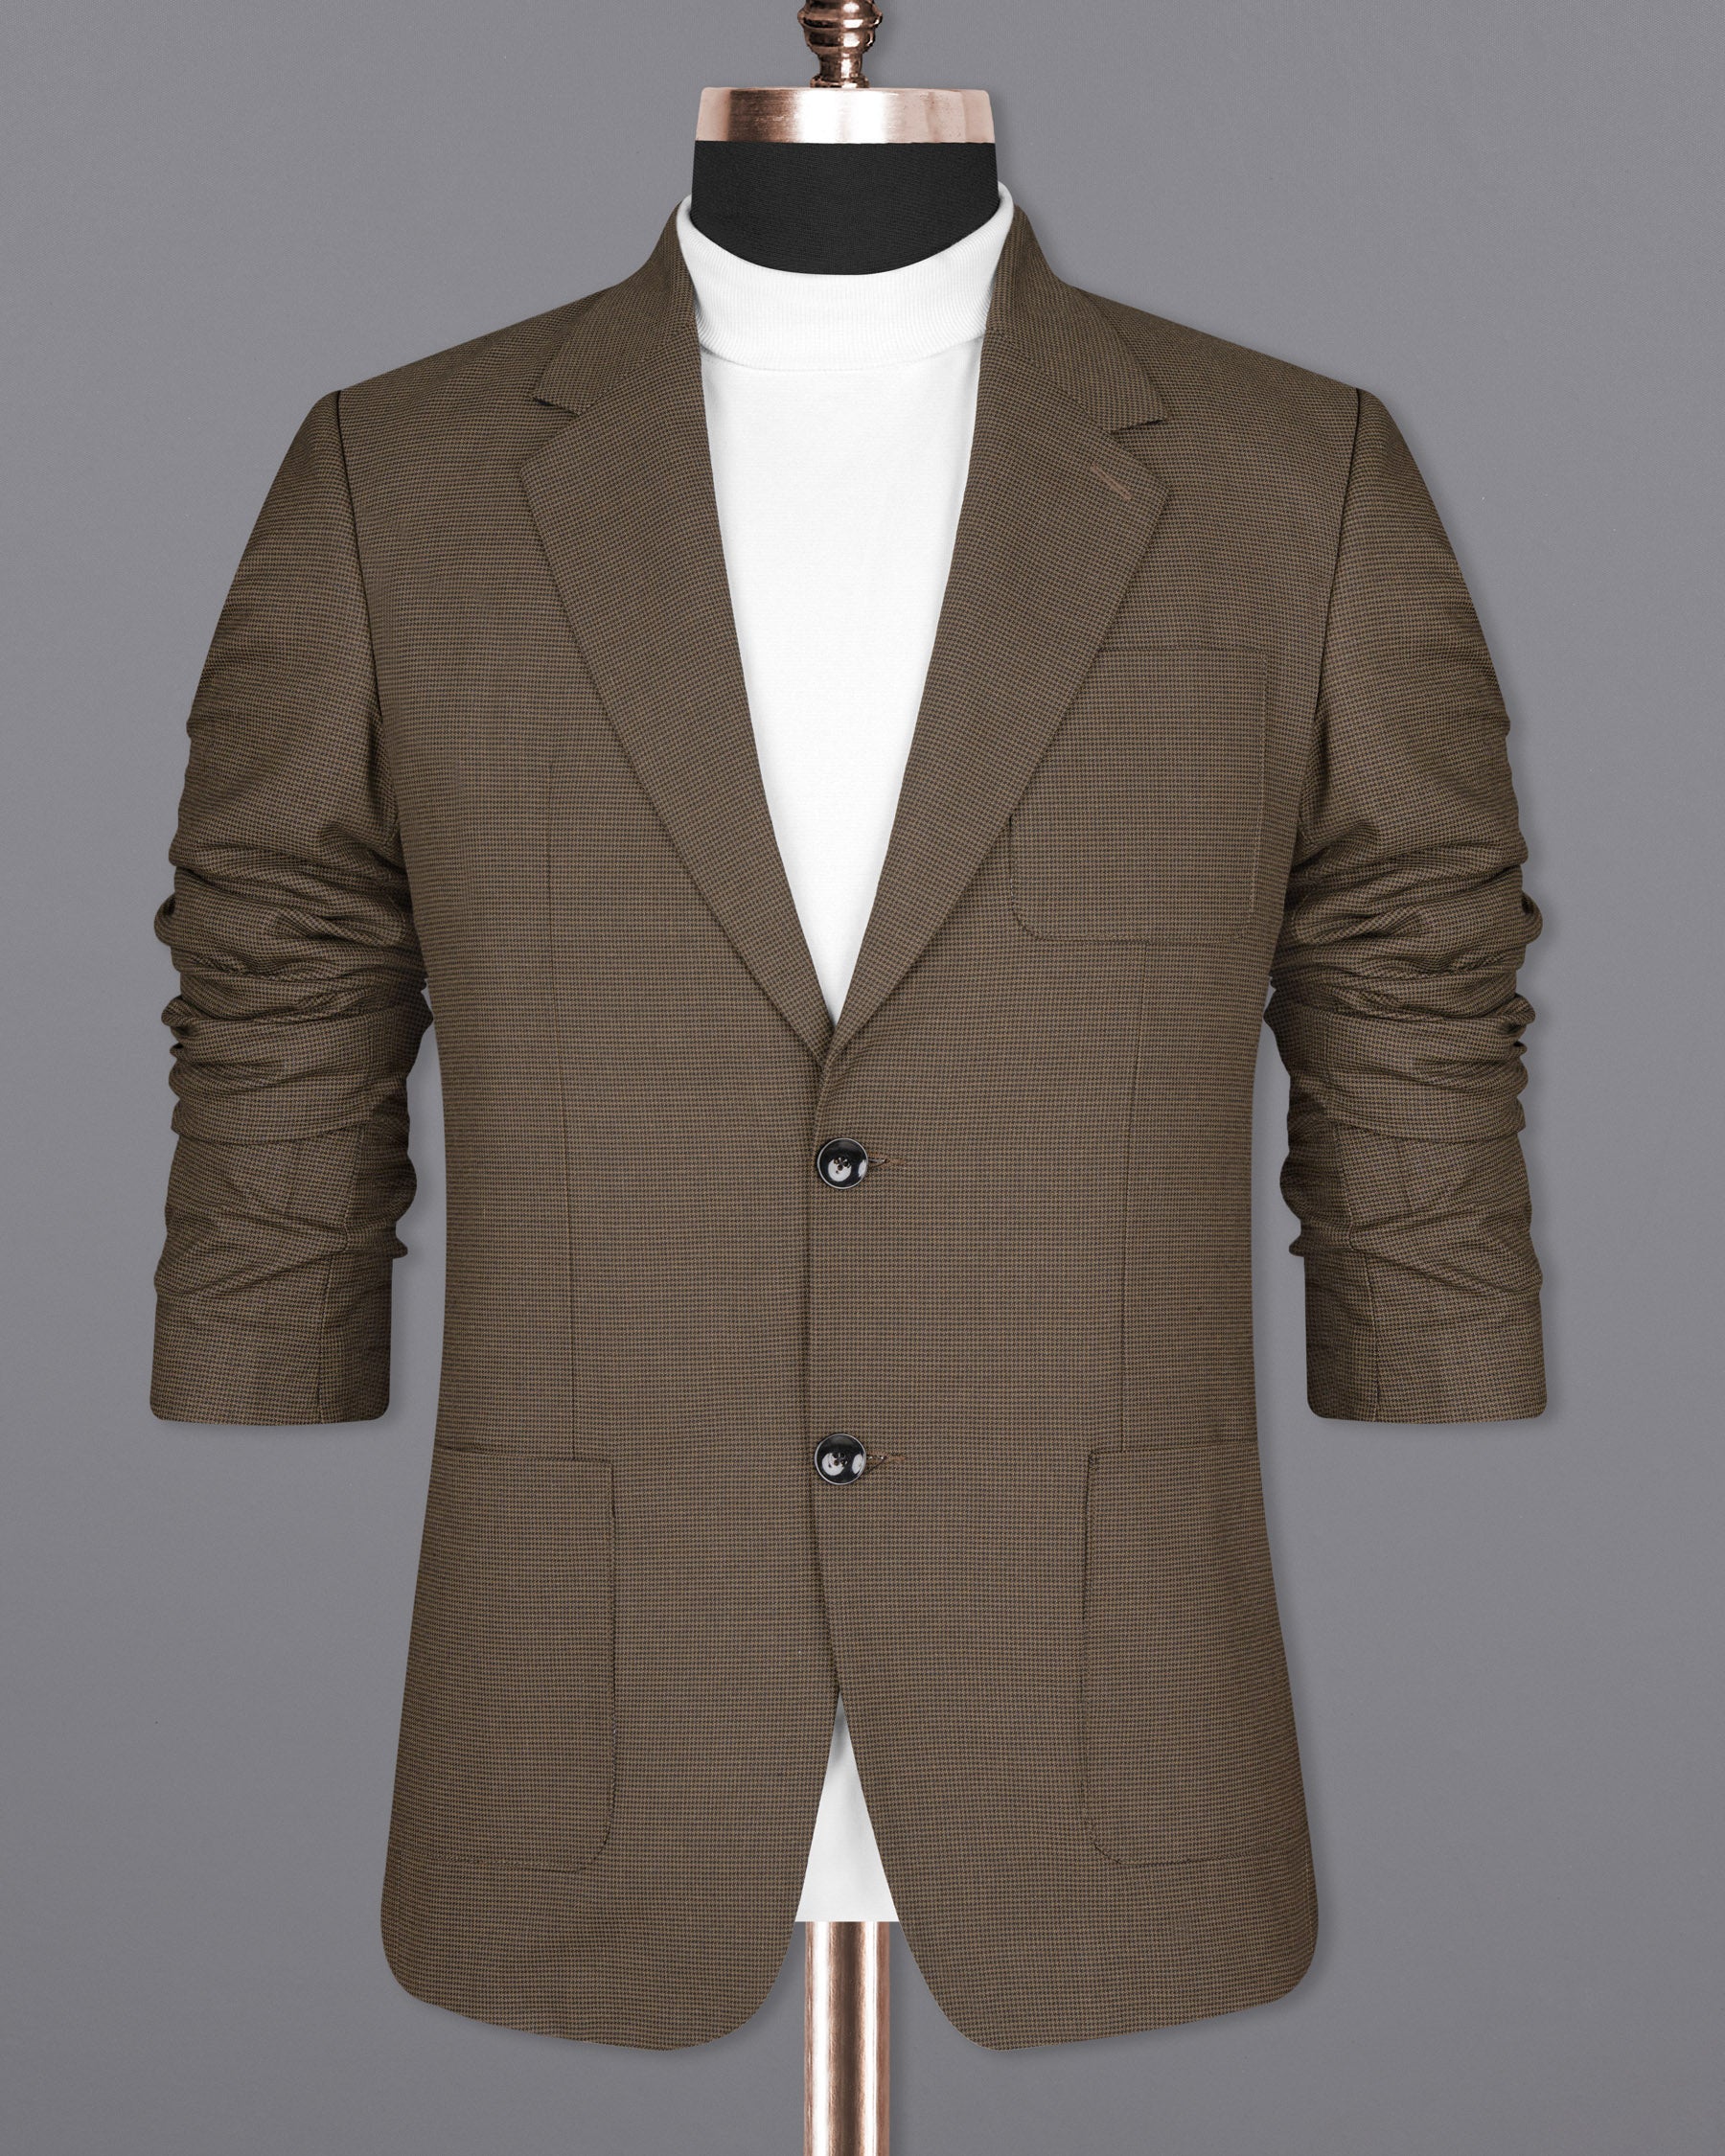 Coffee Brown Hounstooth Wool Rich Sports Suit ST1600-SB-PP-36, ST1600-SB-PP-38, ST1600-SB-PP-40, ST1600-SB-PP-42, ST1600-SB-PP-44, ST1600-SB-PP-46, ST1600-SB-PP-48, ST1600-SB-PP-50, ST1600-SB-PP-52, ST1600-SB-PP-54, ST1600-SB-PP-56, ST1600-SB-PP-58, ST1600-SB-PP-60